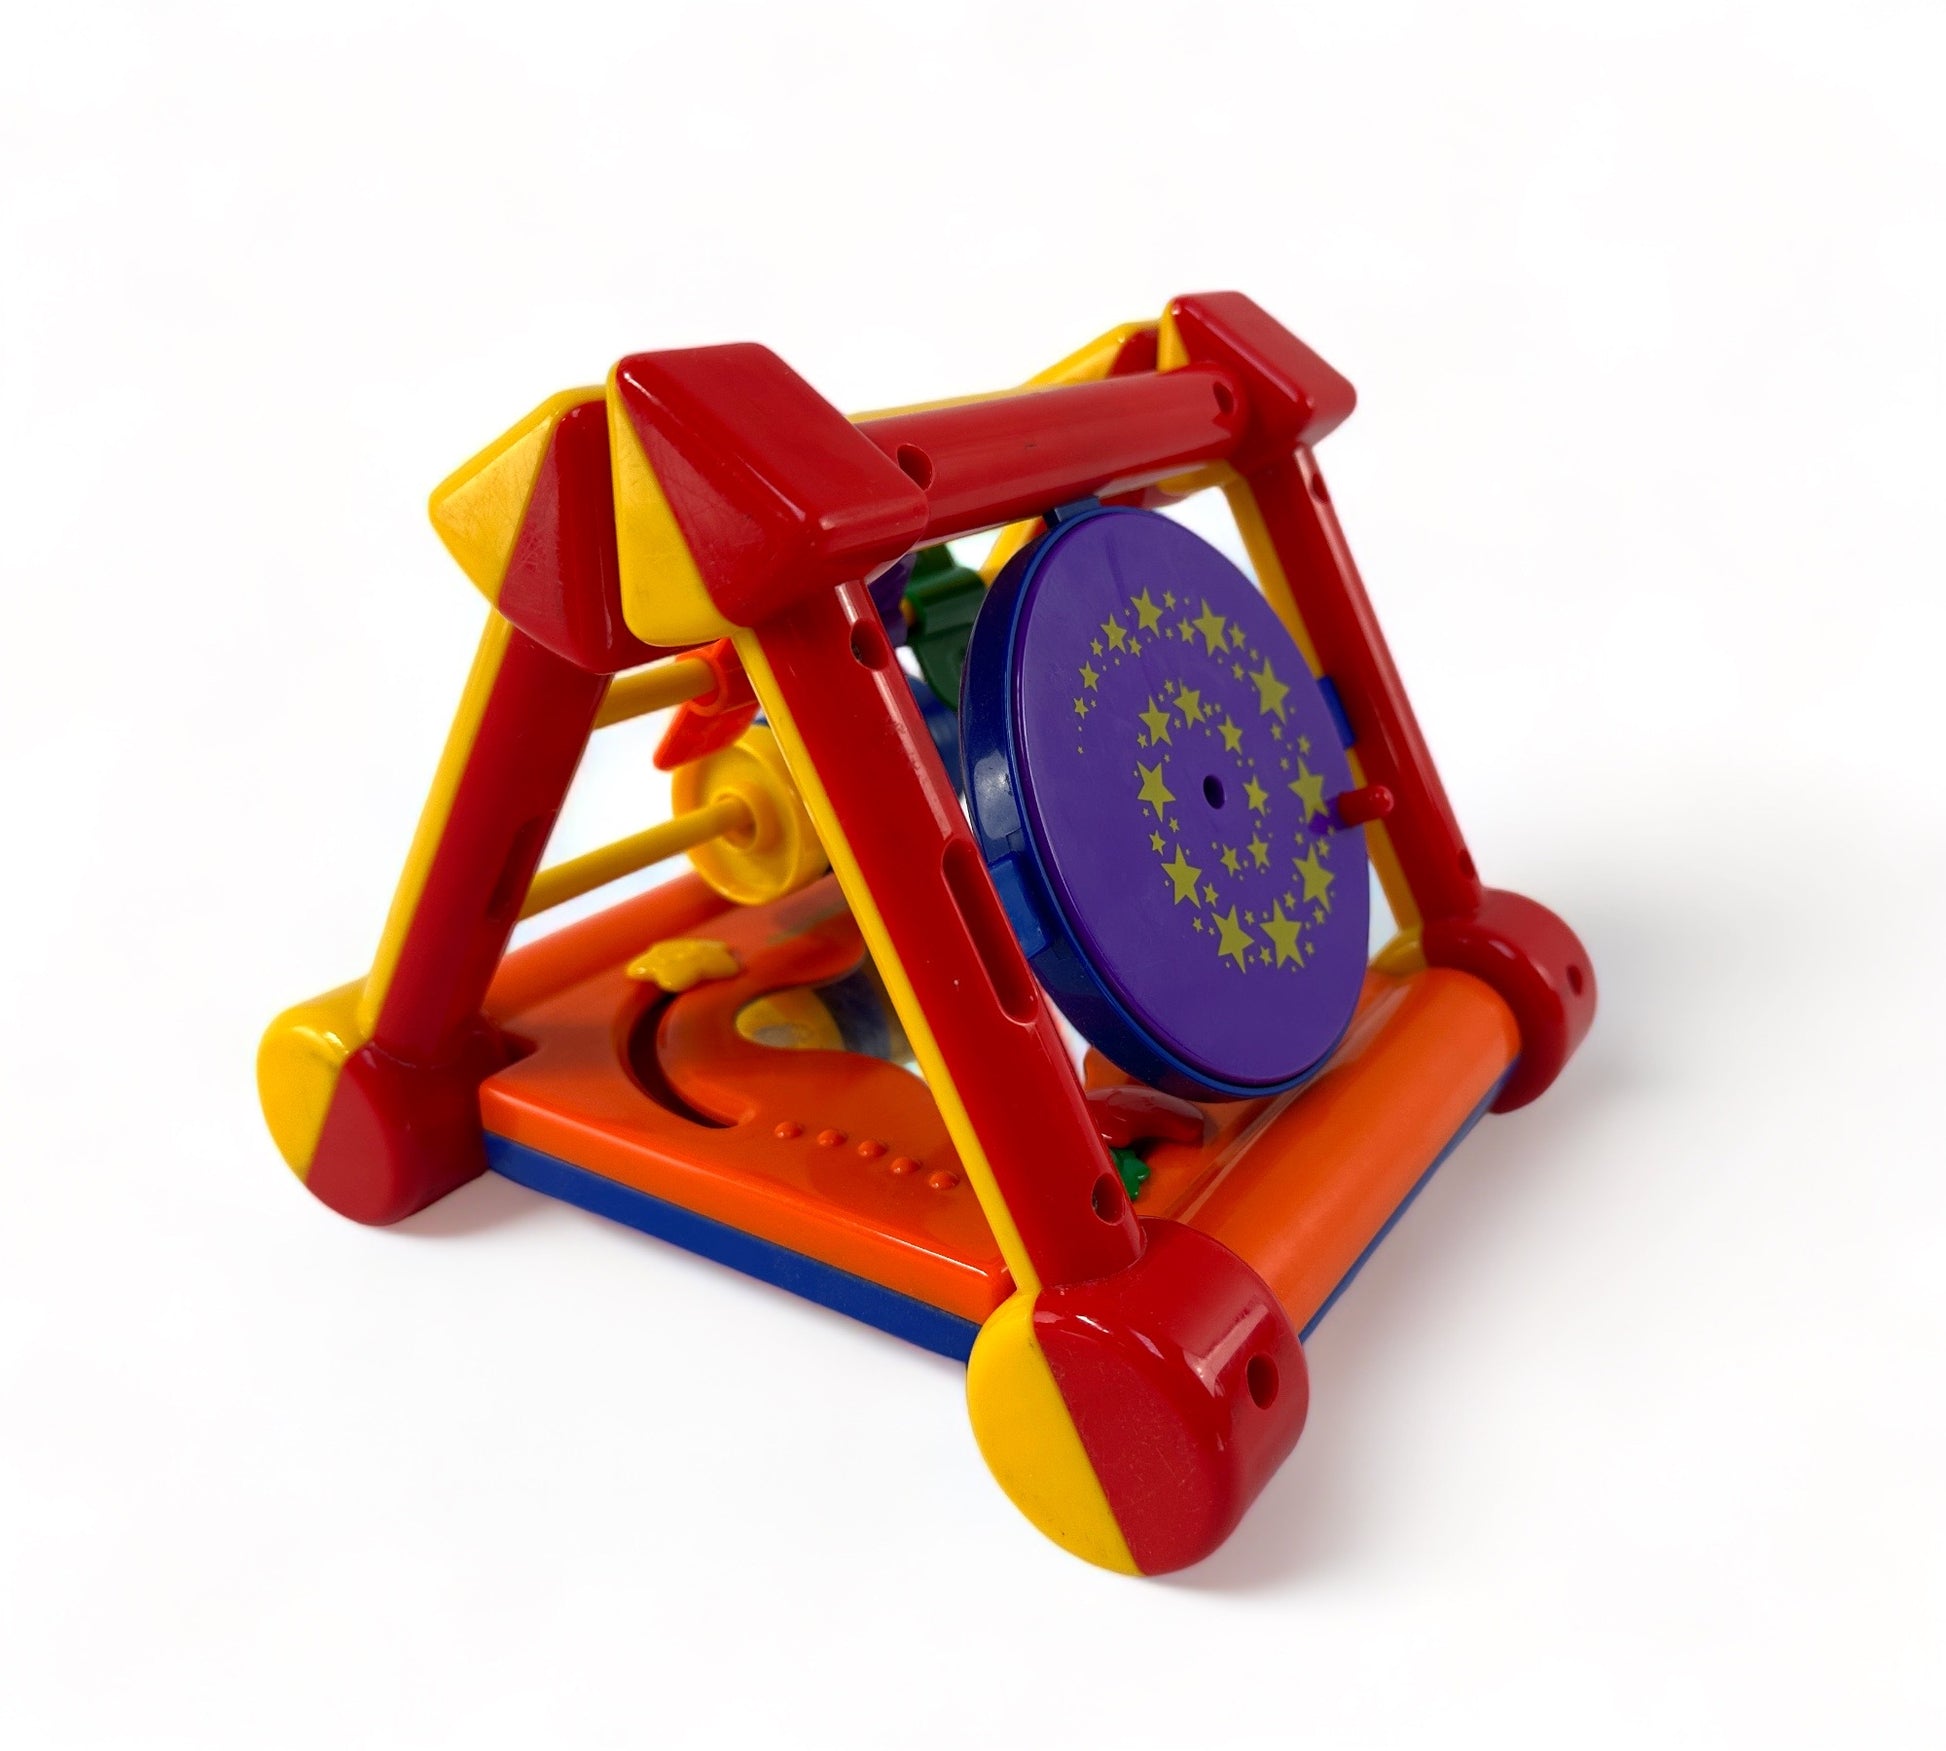 Try-Angle 5-in-1 Baby Activity Center